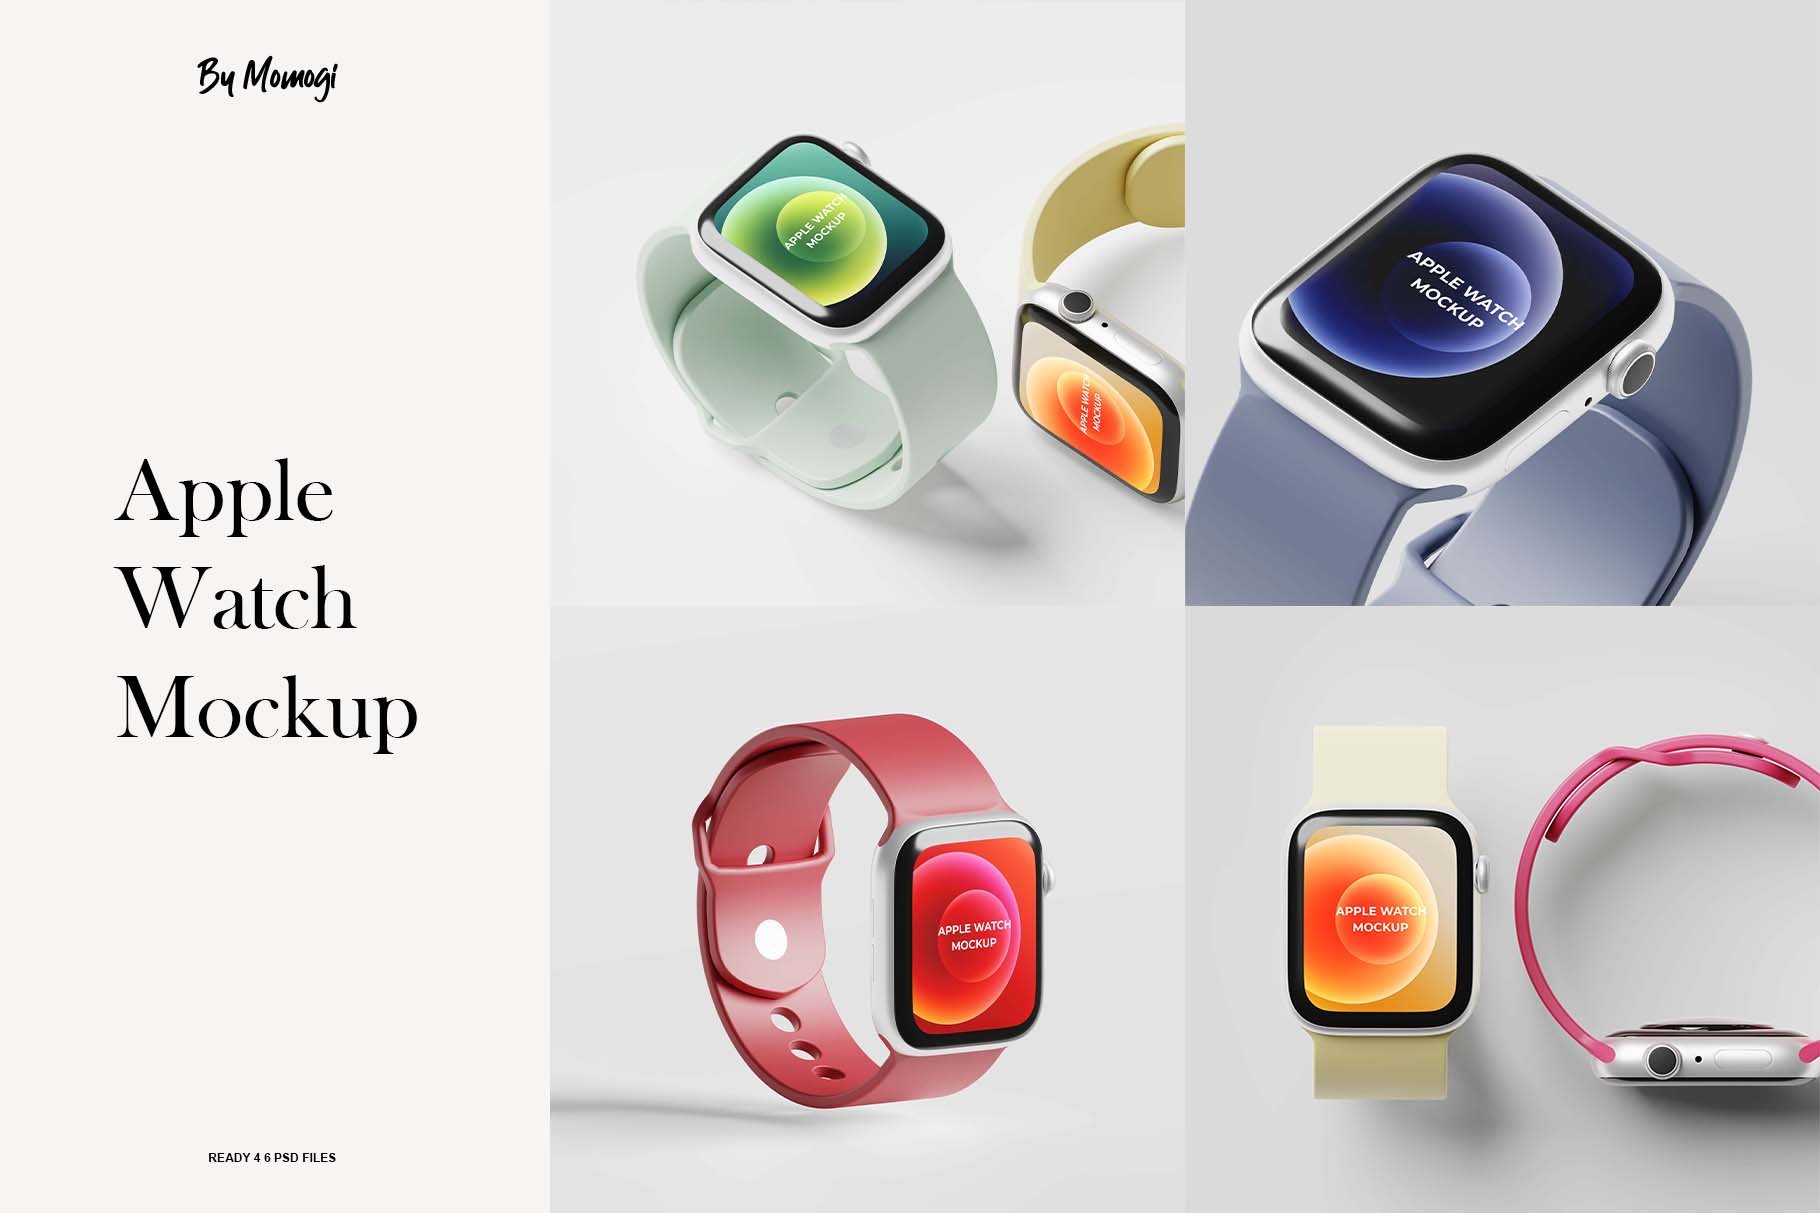 Apple Watch Mockup cover image.